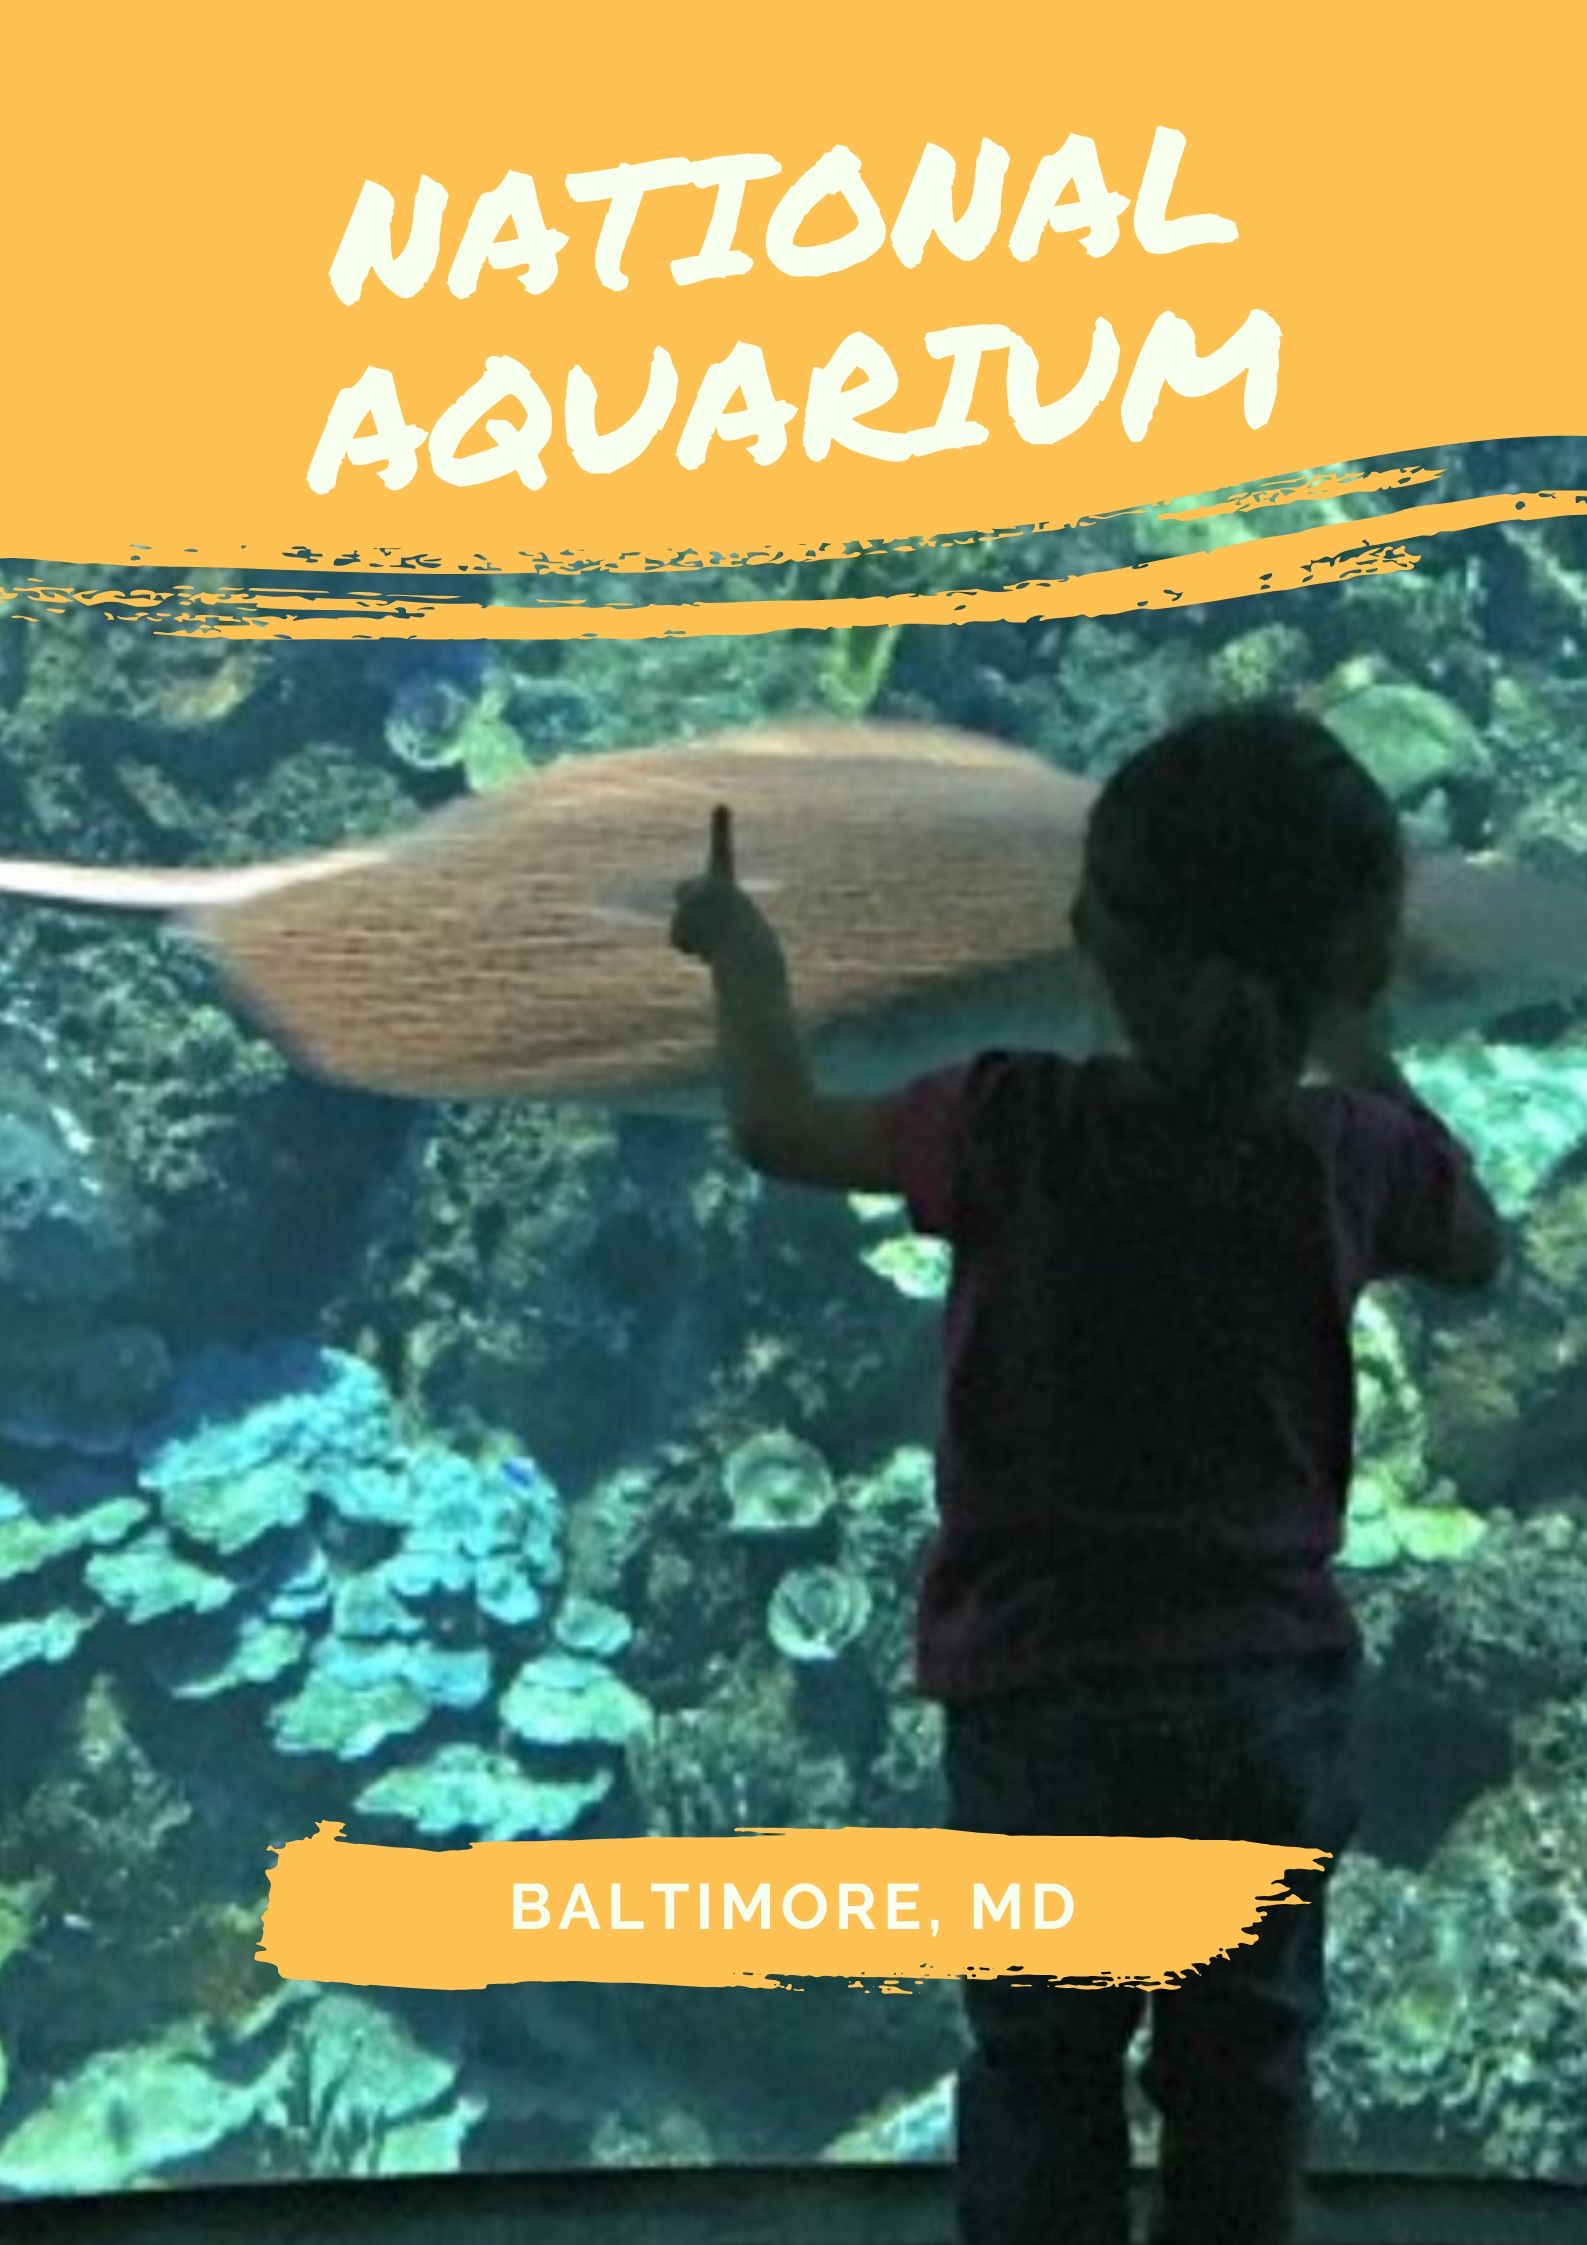 The National Aquarium in Baltimore, Maryland is a great place for kids and adults to visit. We share tips to plan your visit and avoid the crowds! #baltimoreaquarium #nationalaquariumbaltimore  #baltimoreaquariumkids #thingstodoinbaltimore #baltimoremaryland #baltimoremarylandinnerharbor #baltimoremarylandwithkids via @karendawkins